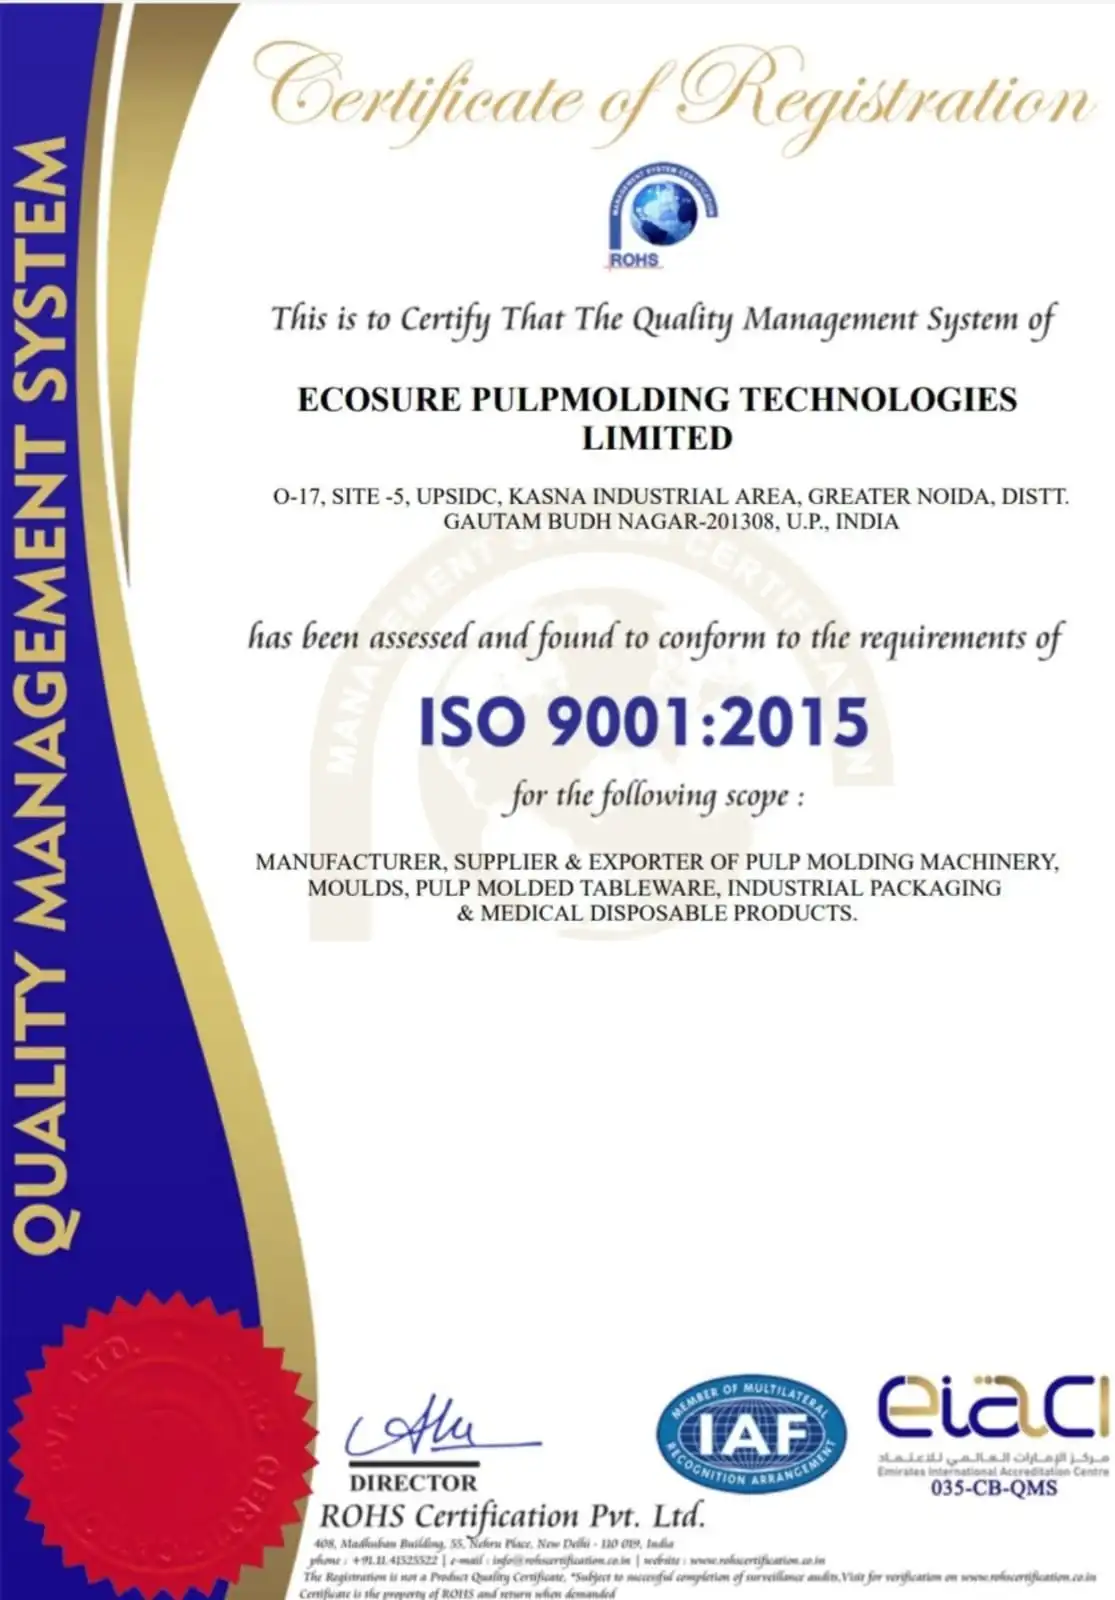 Our Certificates-Ecosure pulpmolding Technologies Limited